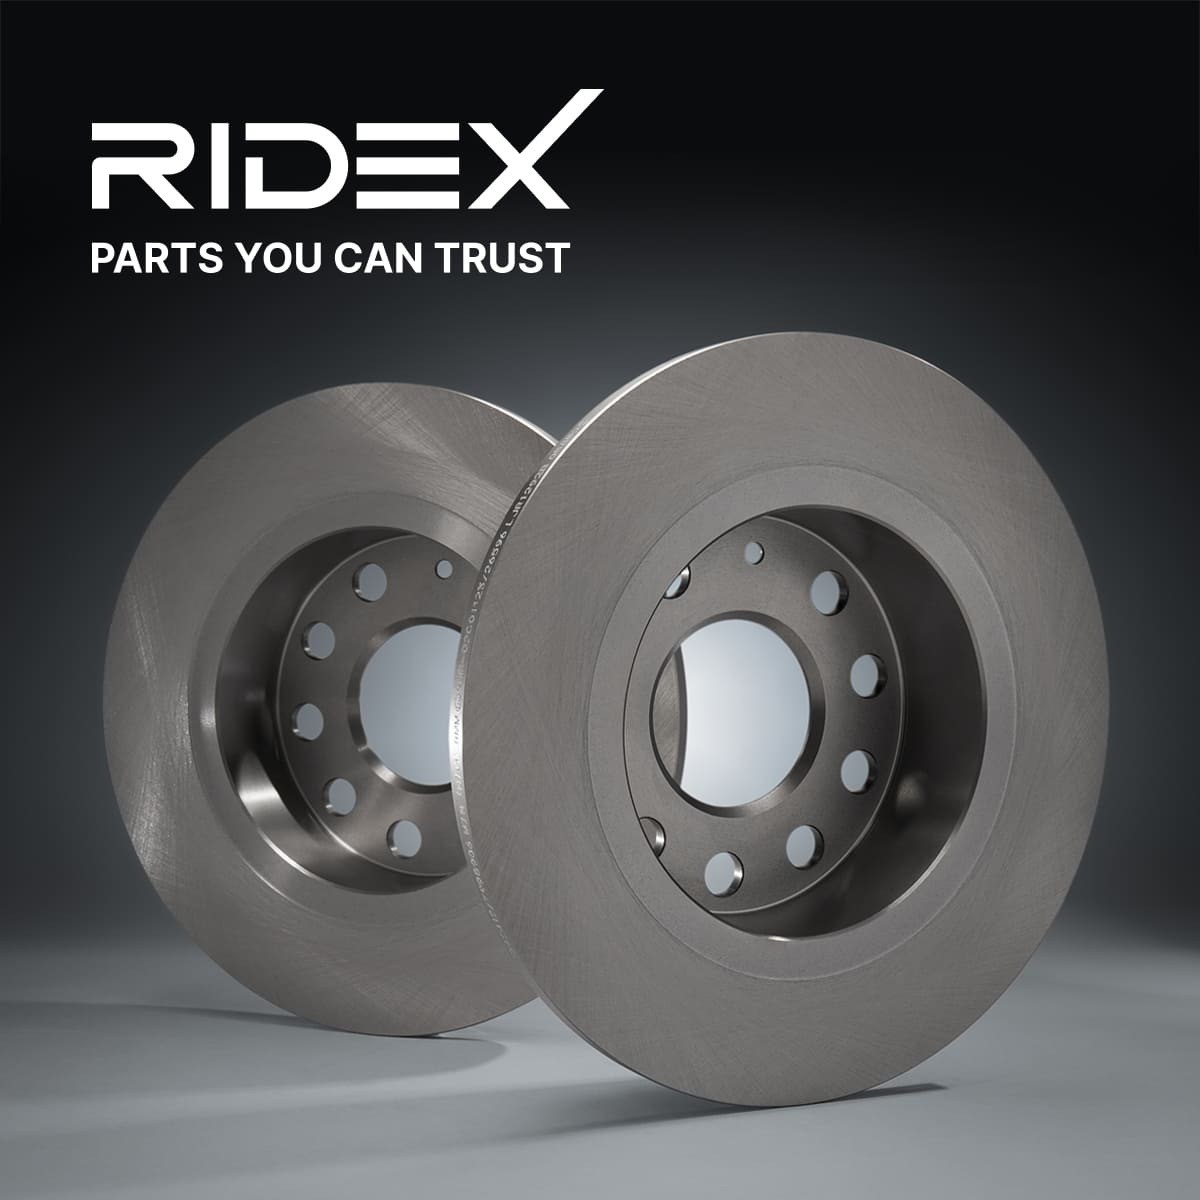 82B0391 Brake discs 82B0391 RIDEX Front Axle, 296x26mm, 05/05x114,3, internally vented, Uncoated